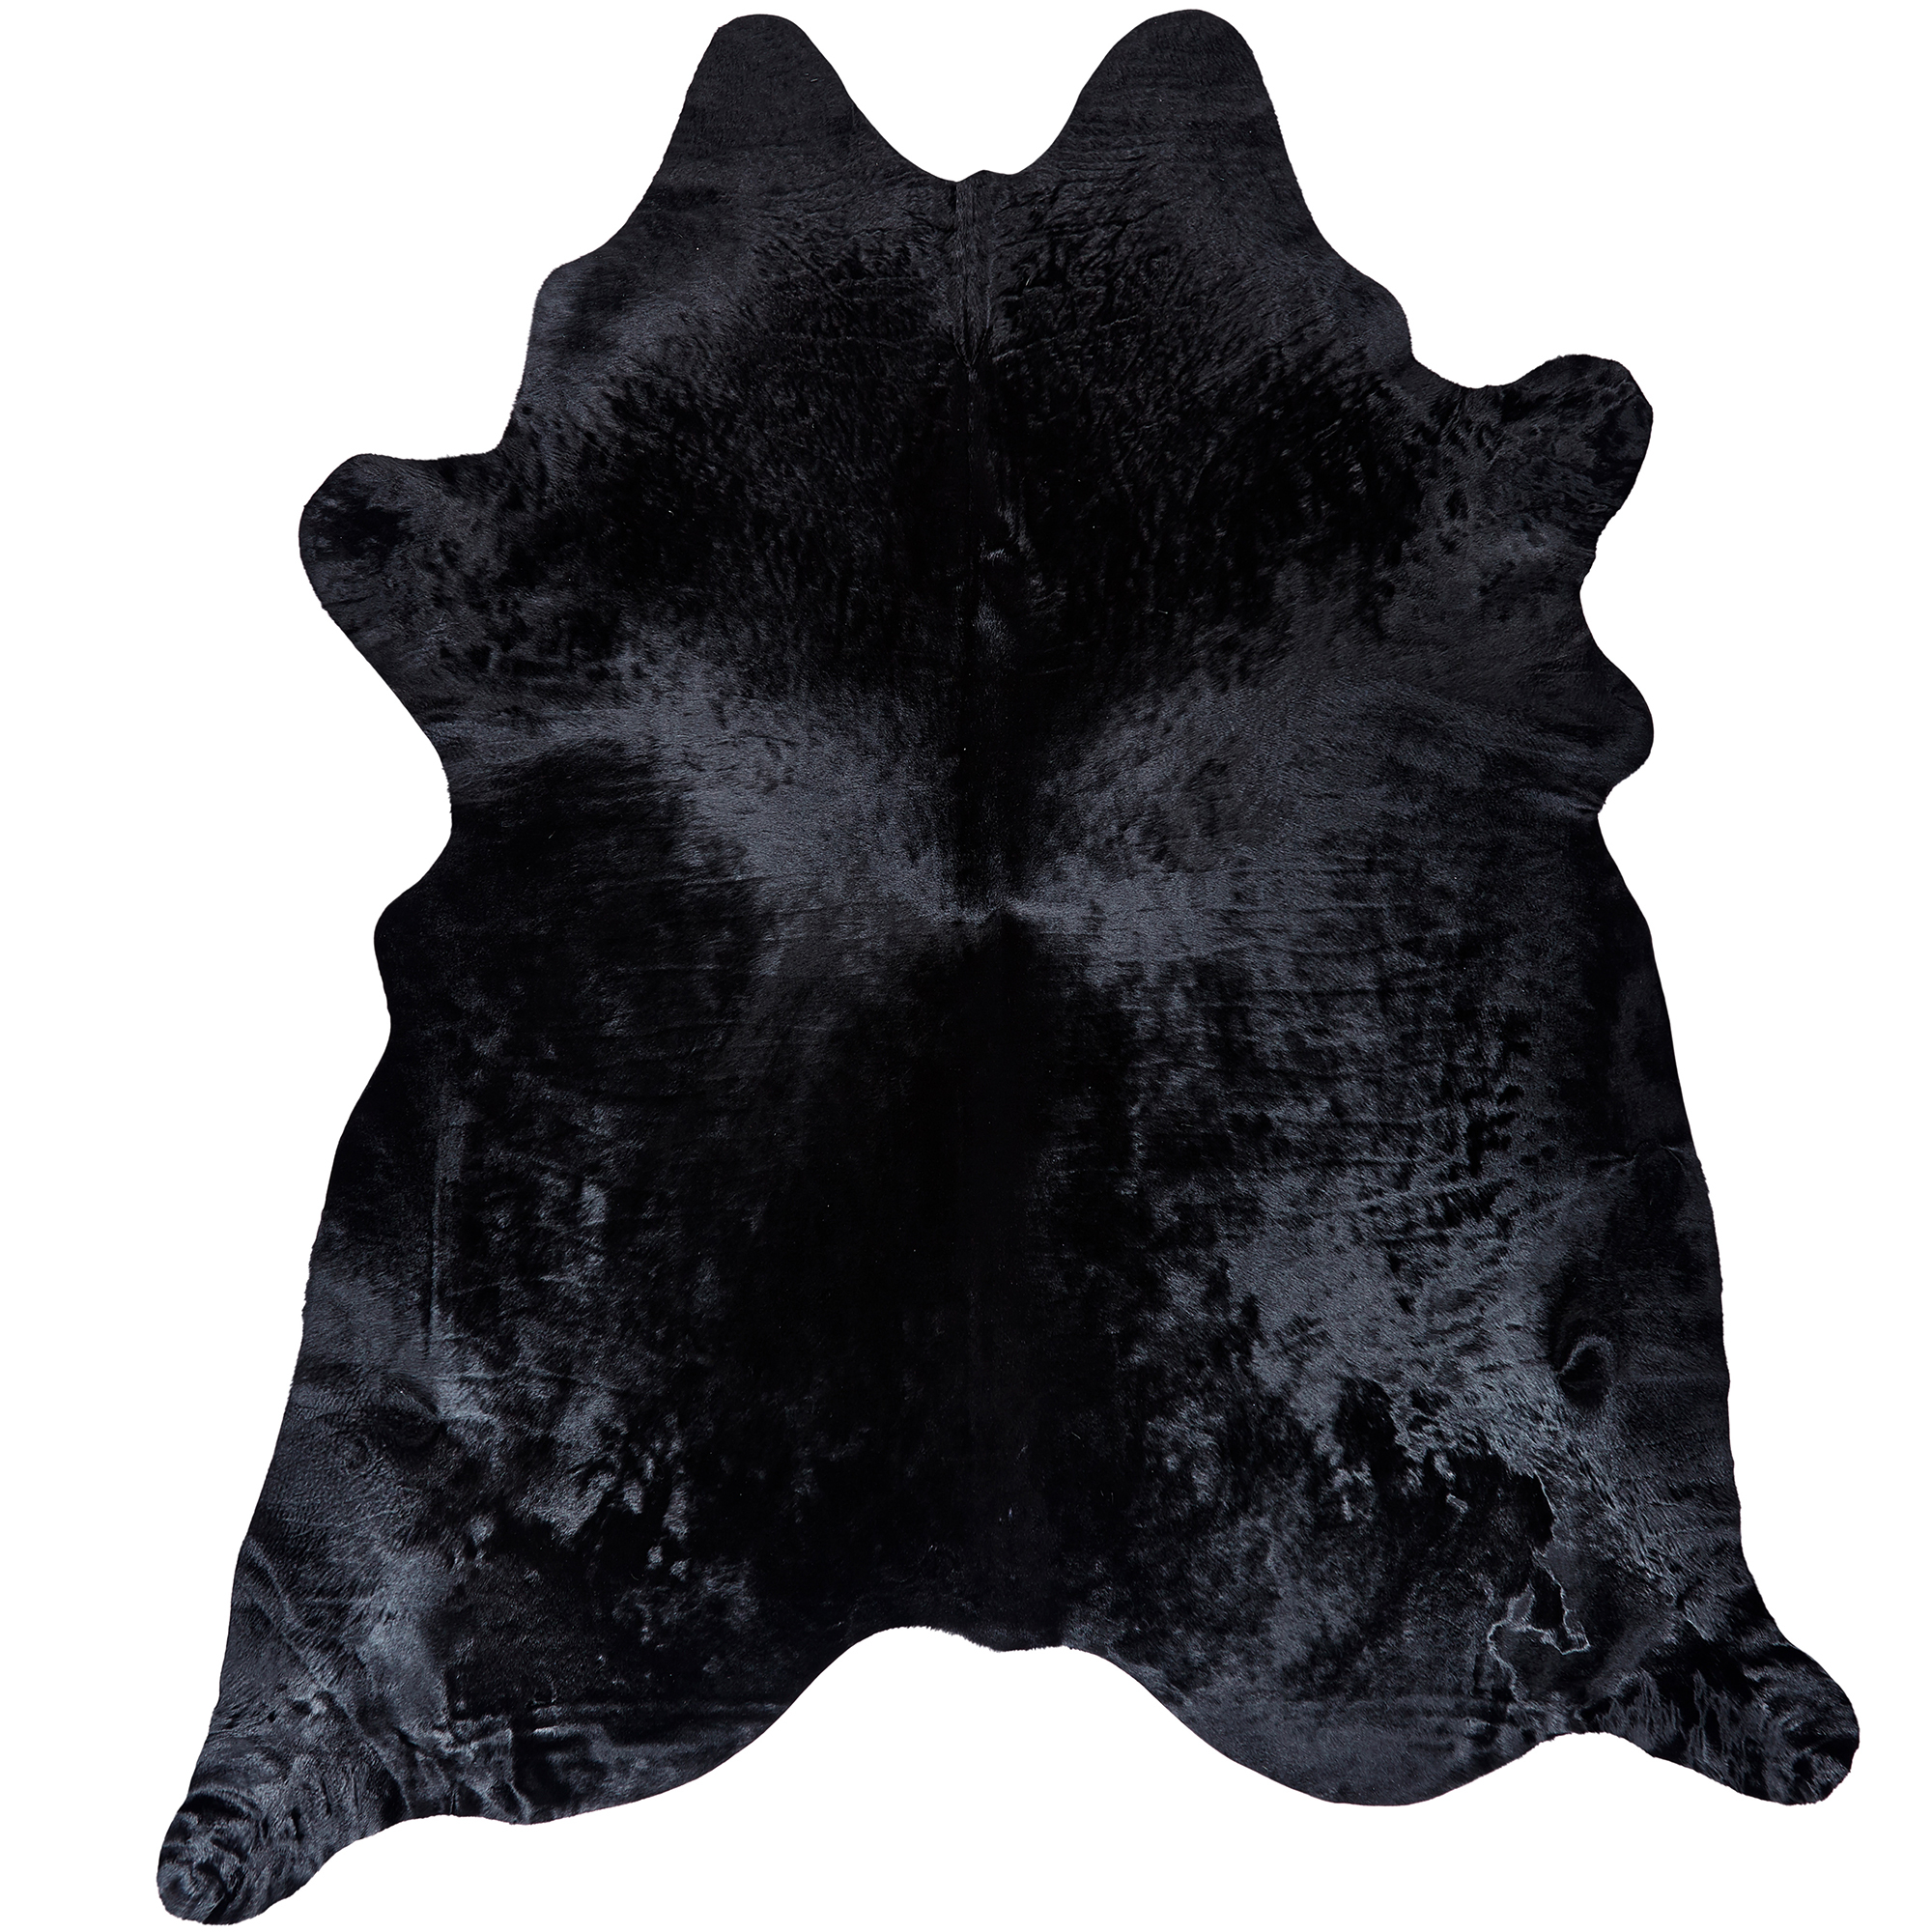 Nswleather Black Luxury Cow Hide Rug Reviews Temple Webster